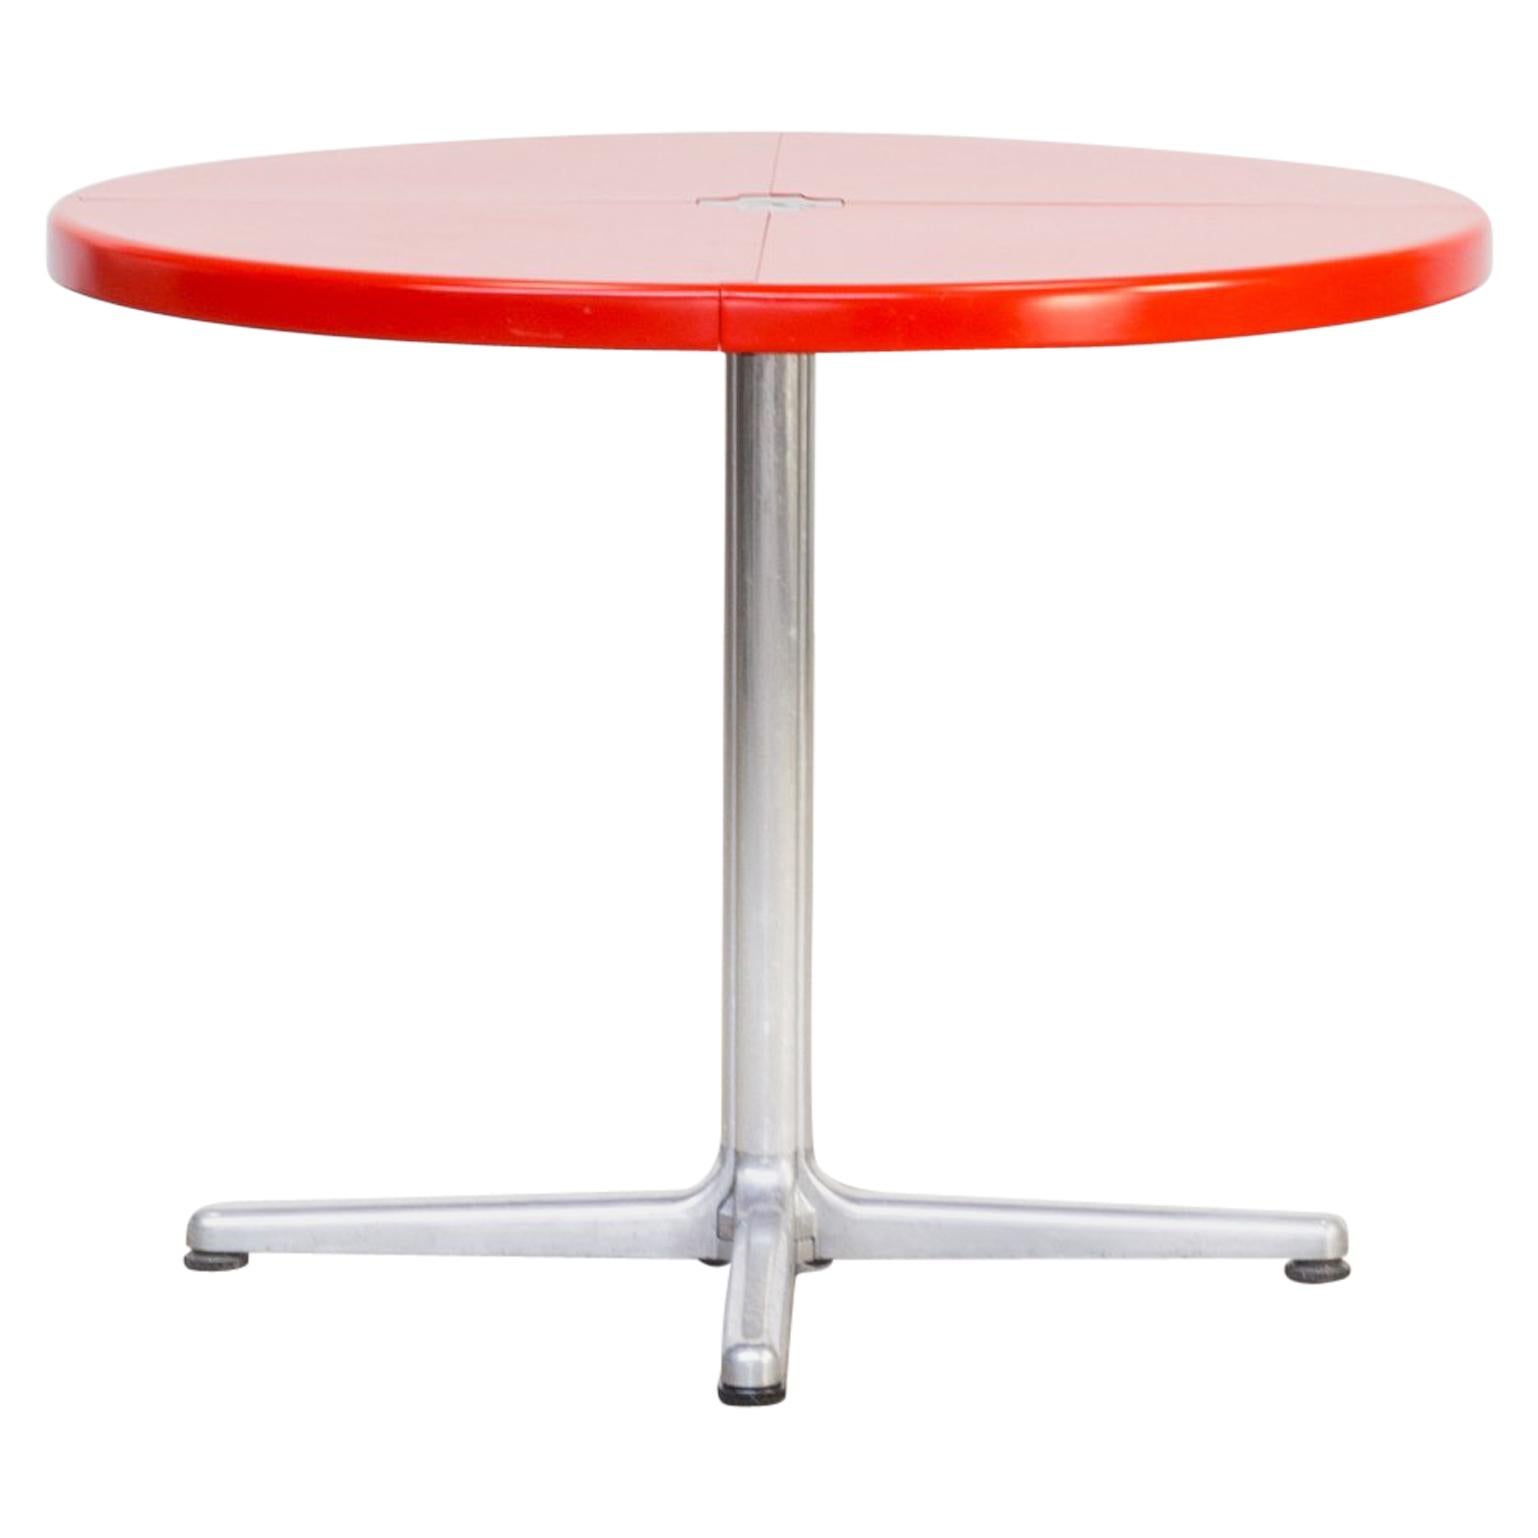 1970s Giancarlo Piretti Foldable Dining Table ‘Plana’ for Castelli For Sale